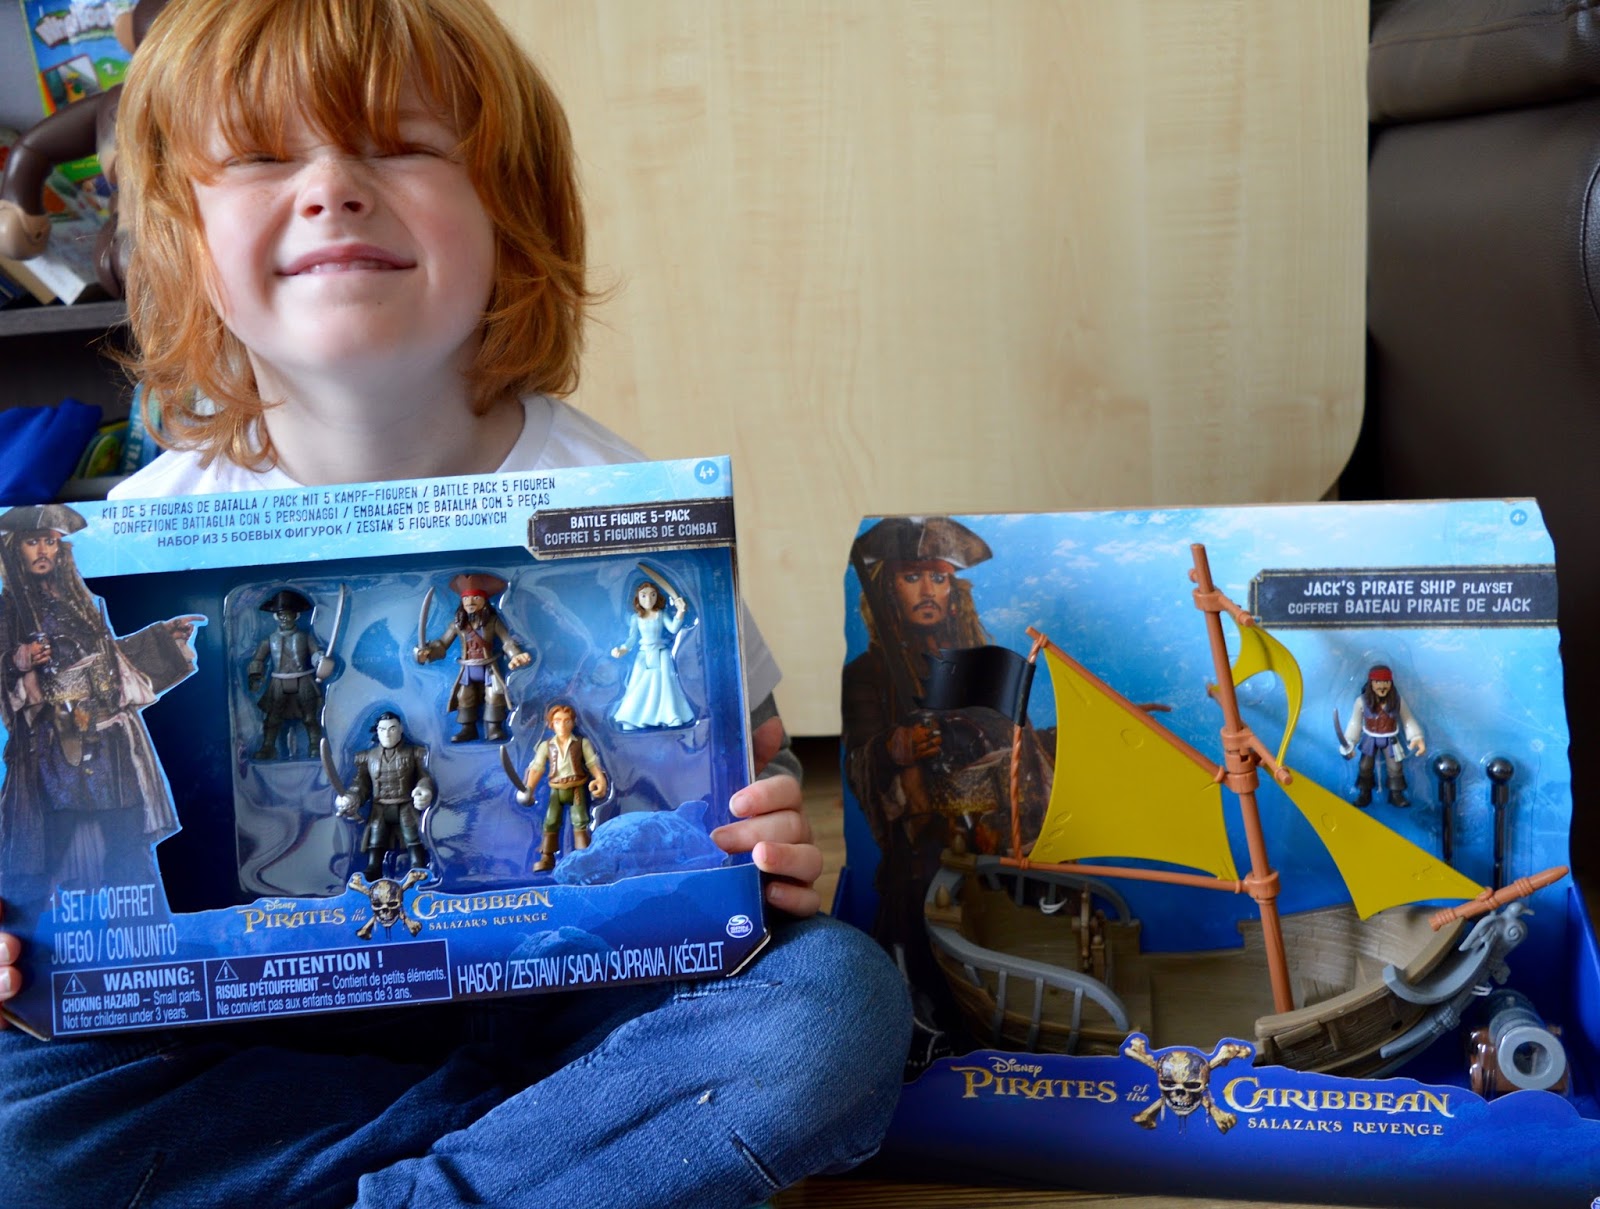 Pirates of the Caribbean Playsets | We Review Jack Sparrow's Pirate Ship and Battle Figures by Spin Master